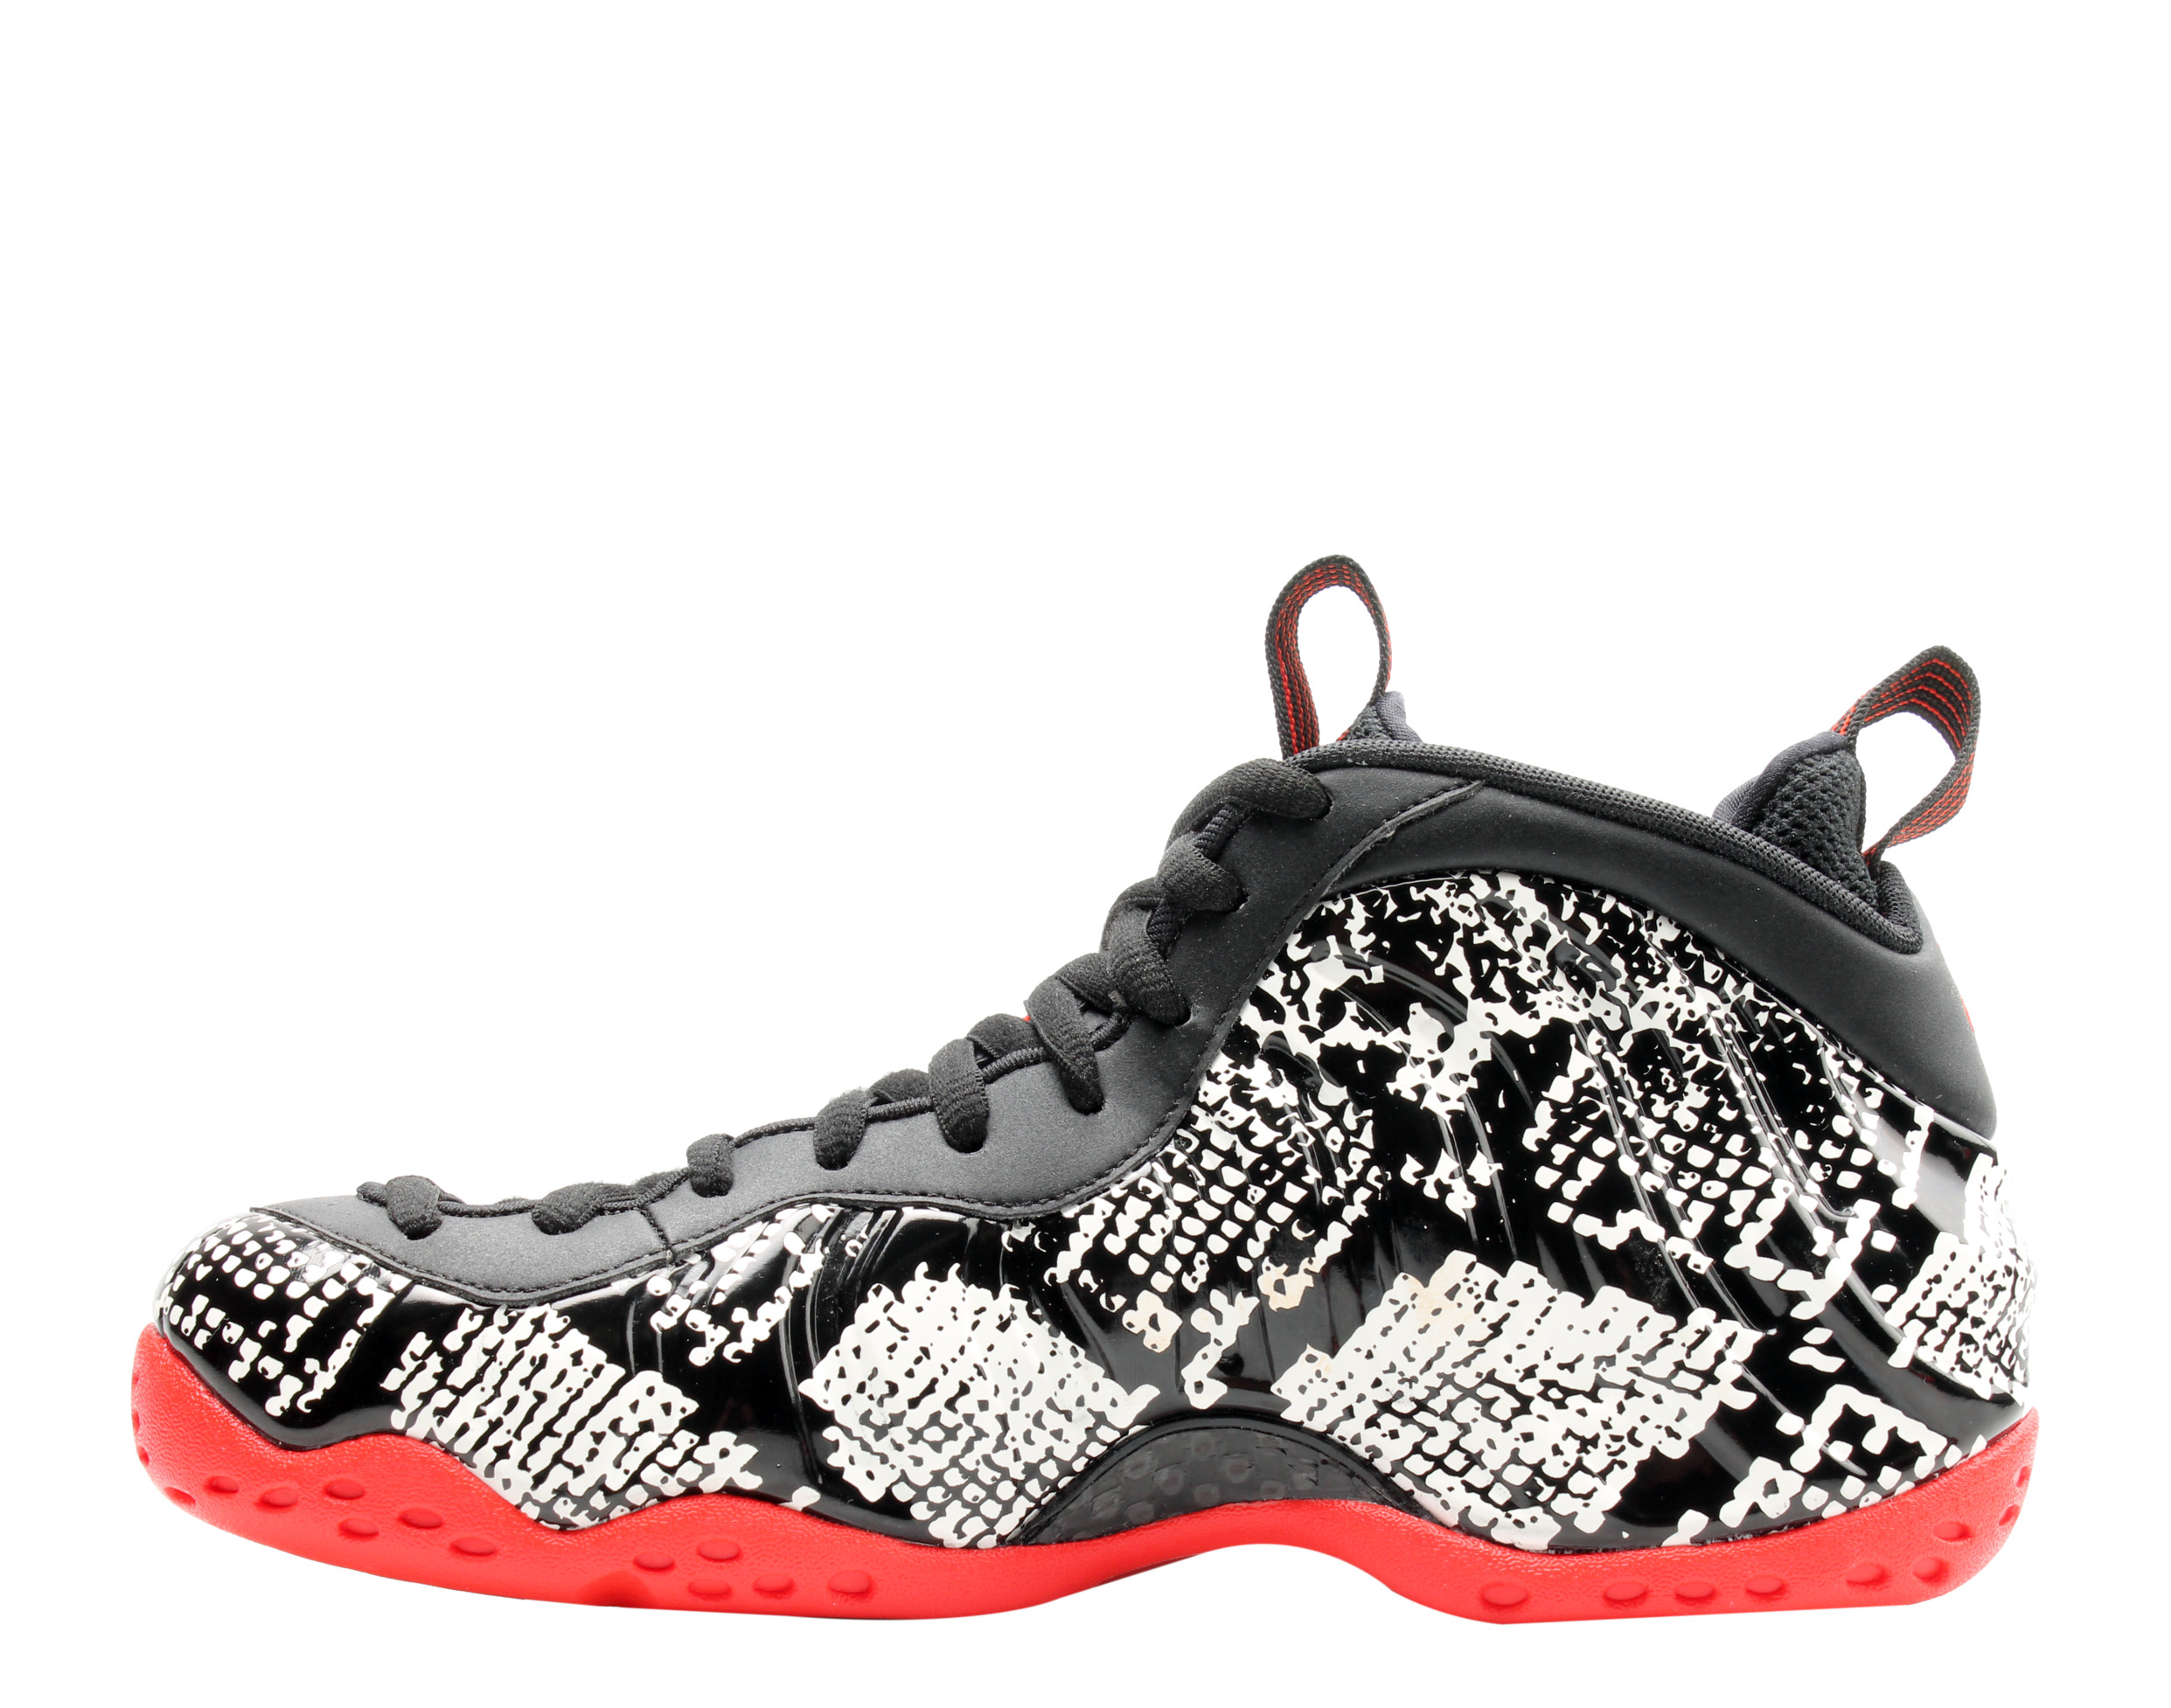 Nike Air Foamposite One Sail/Black-Red Snake Men's Basketball Shoes 314996-101 - image 3 of 6